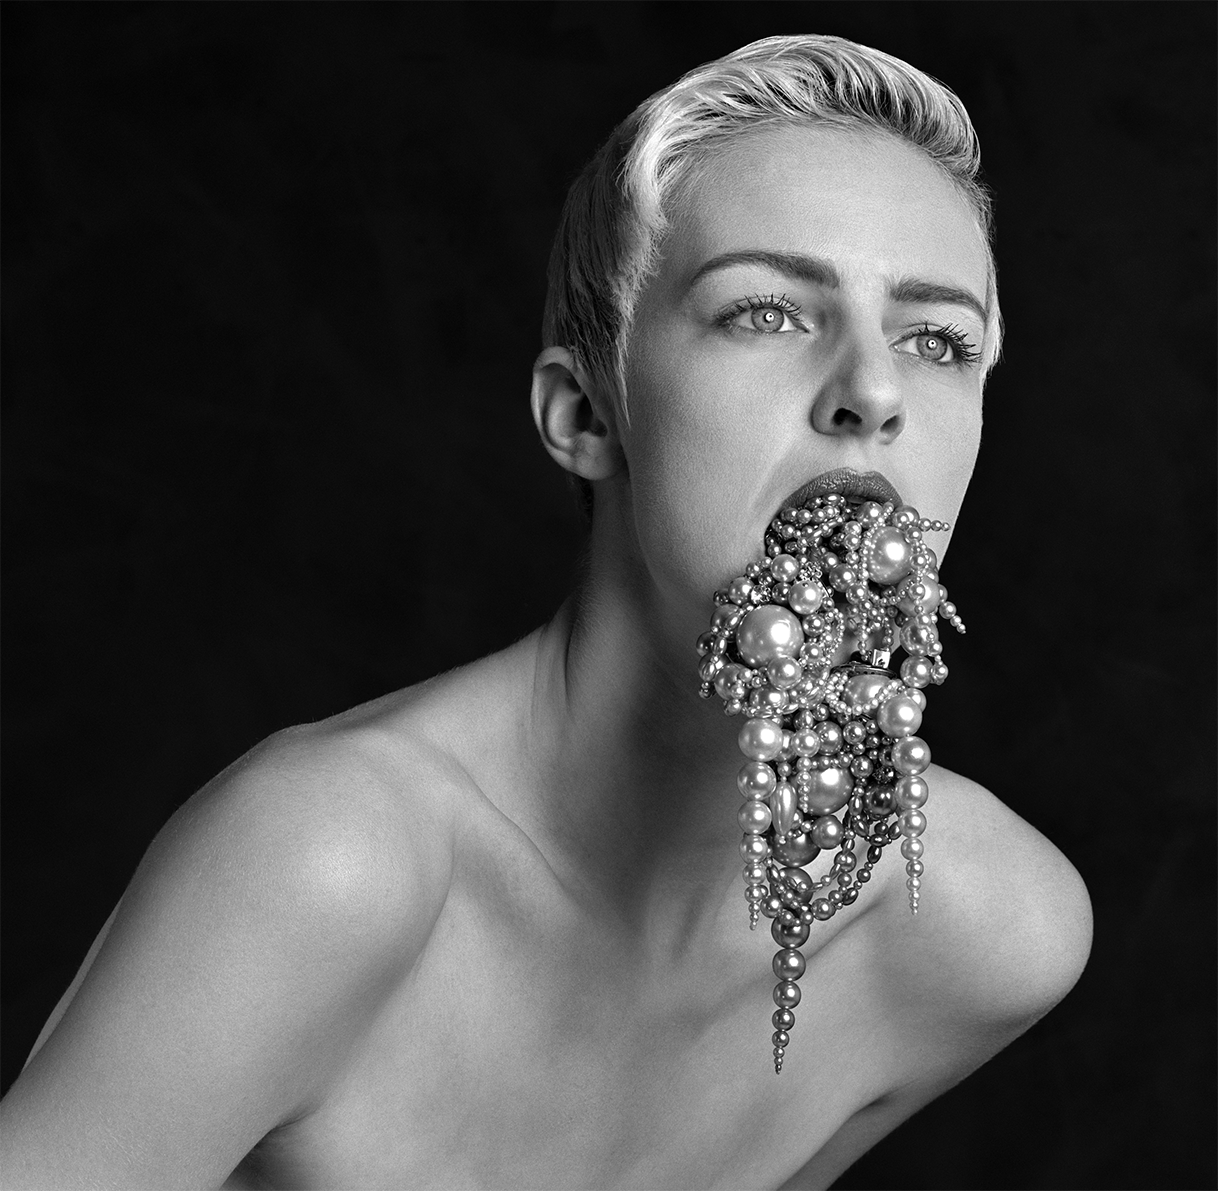 Erwin Olaf Squares, Pearls, 1986 – A Shaded View on Fashion